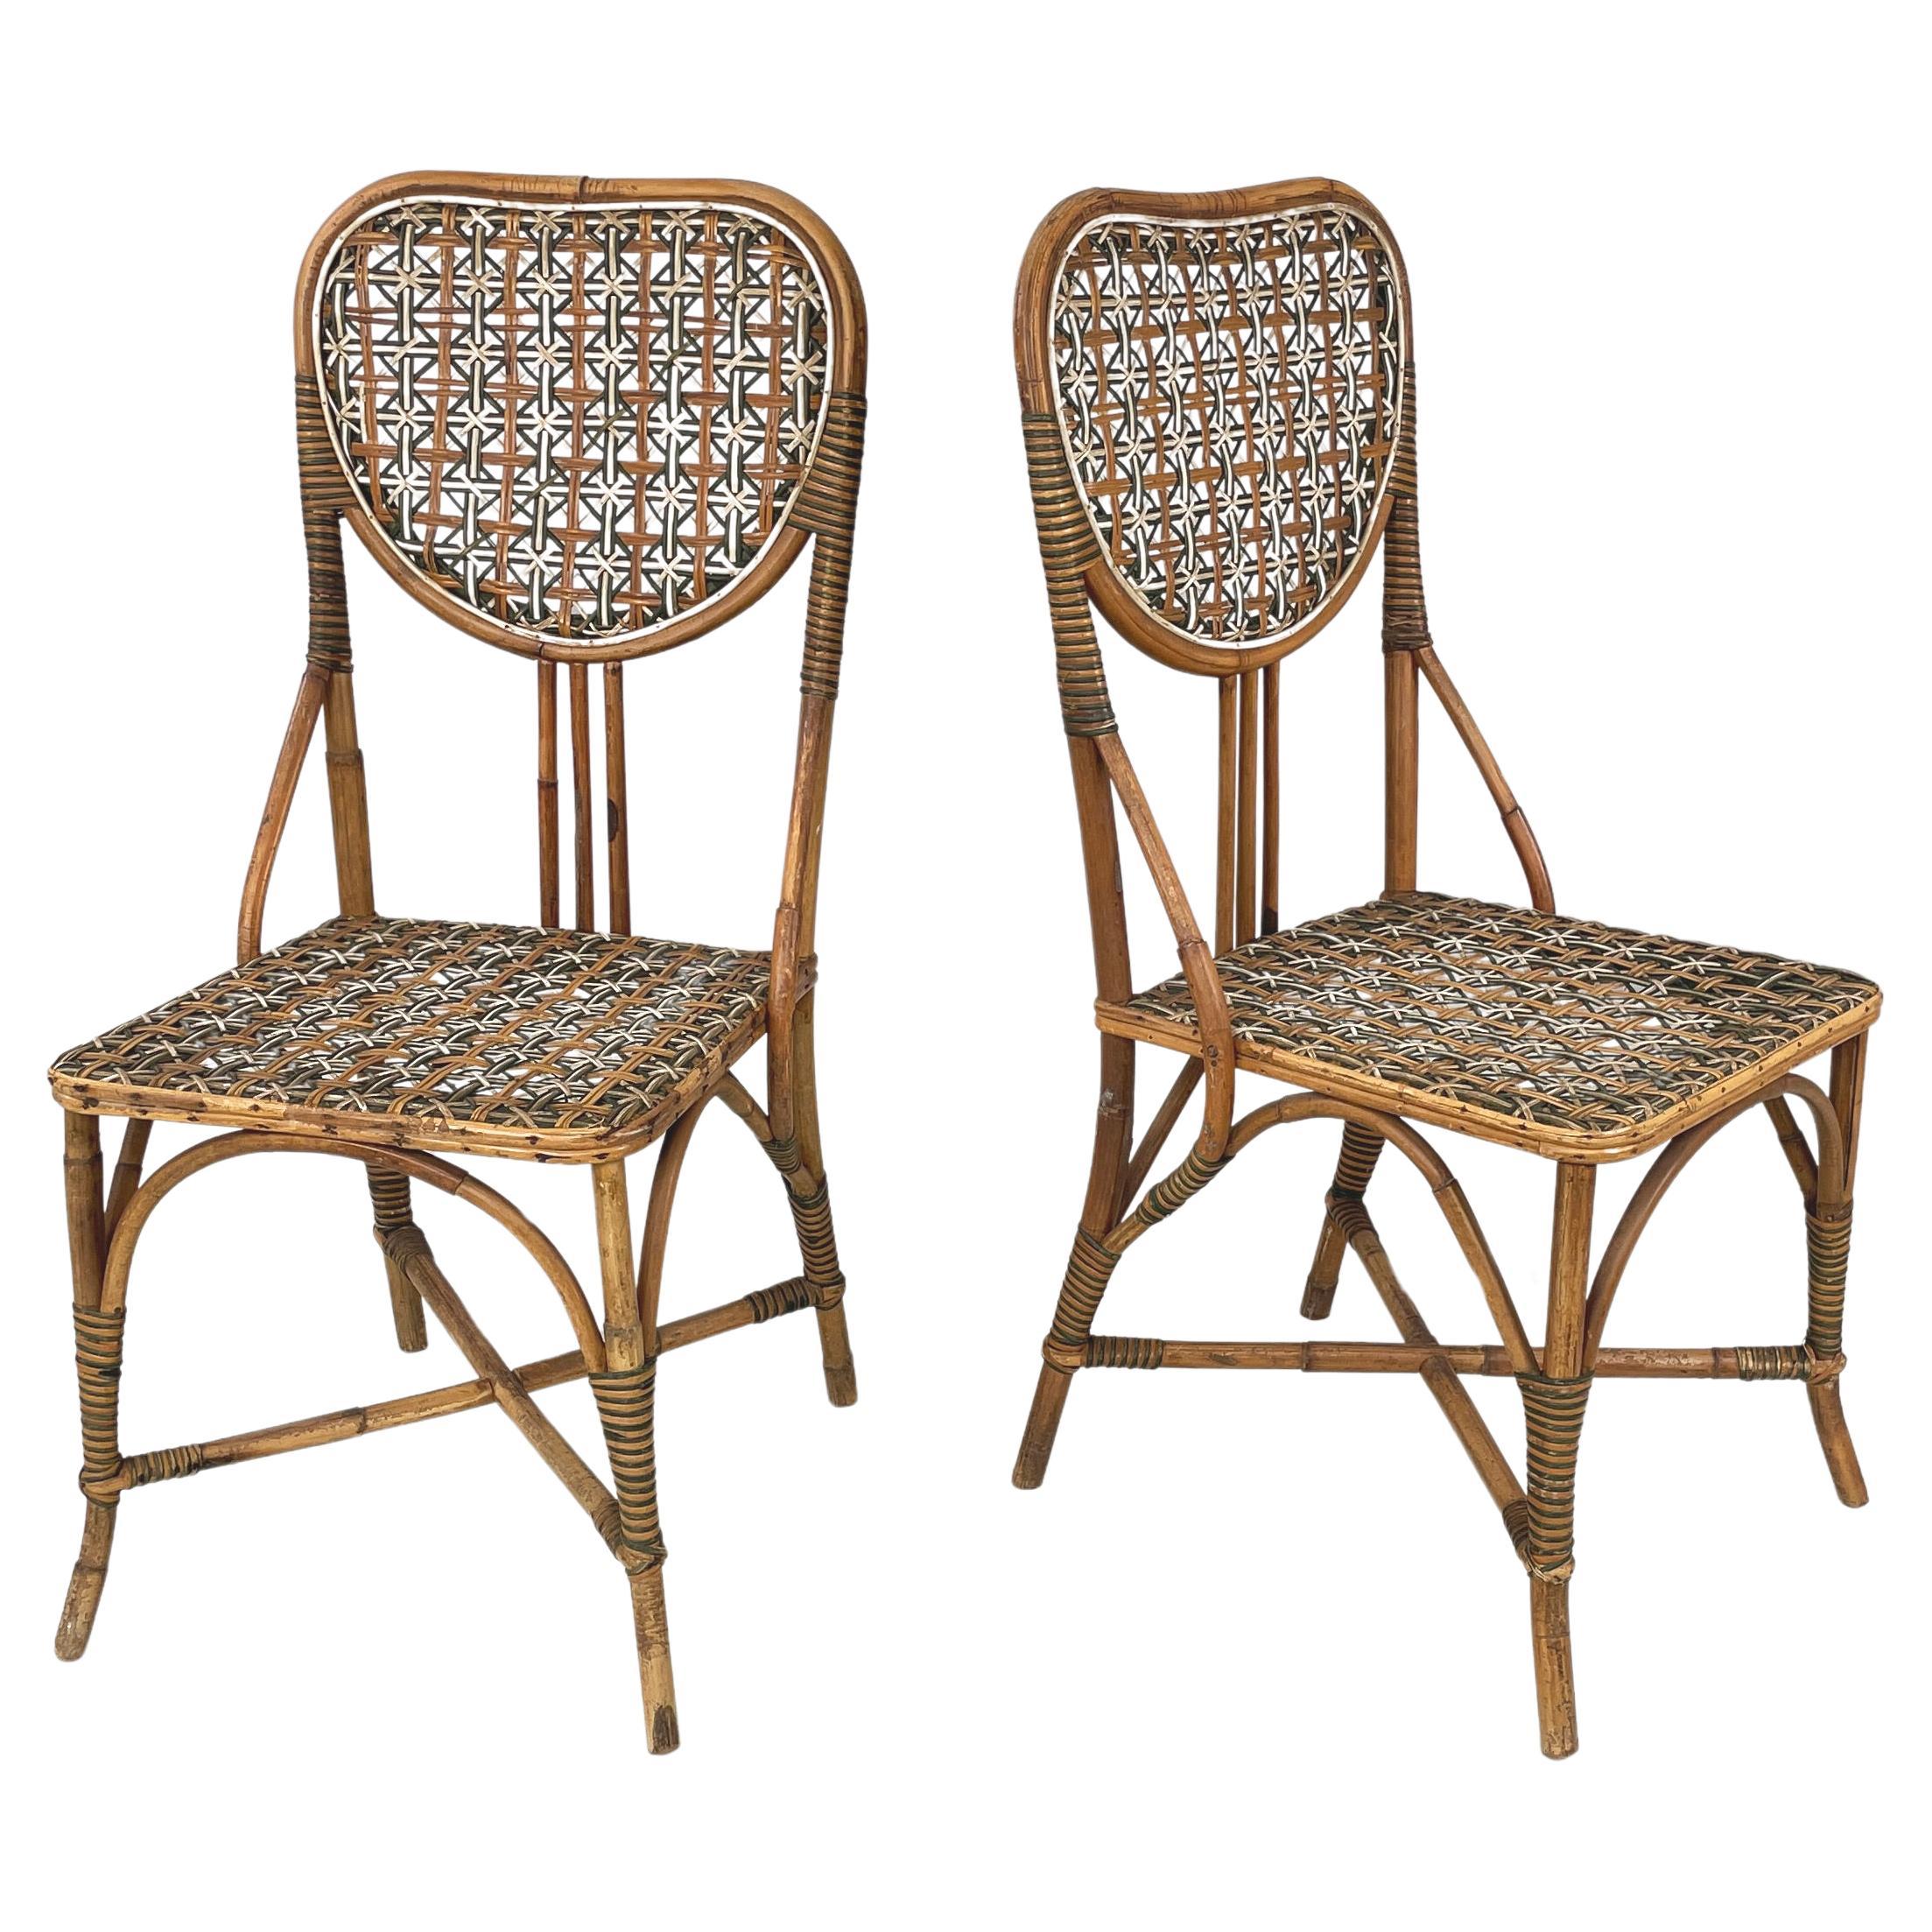 Italian Liberty outdoor chairs in rattan from Palazzo Falconi, early 1900s